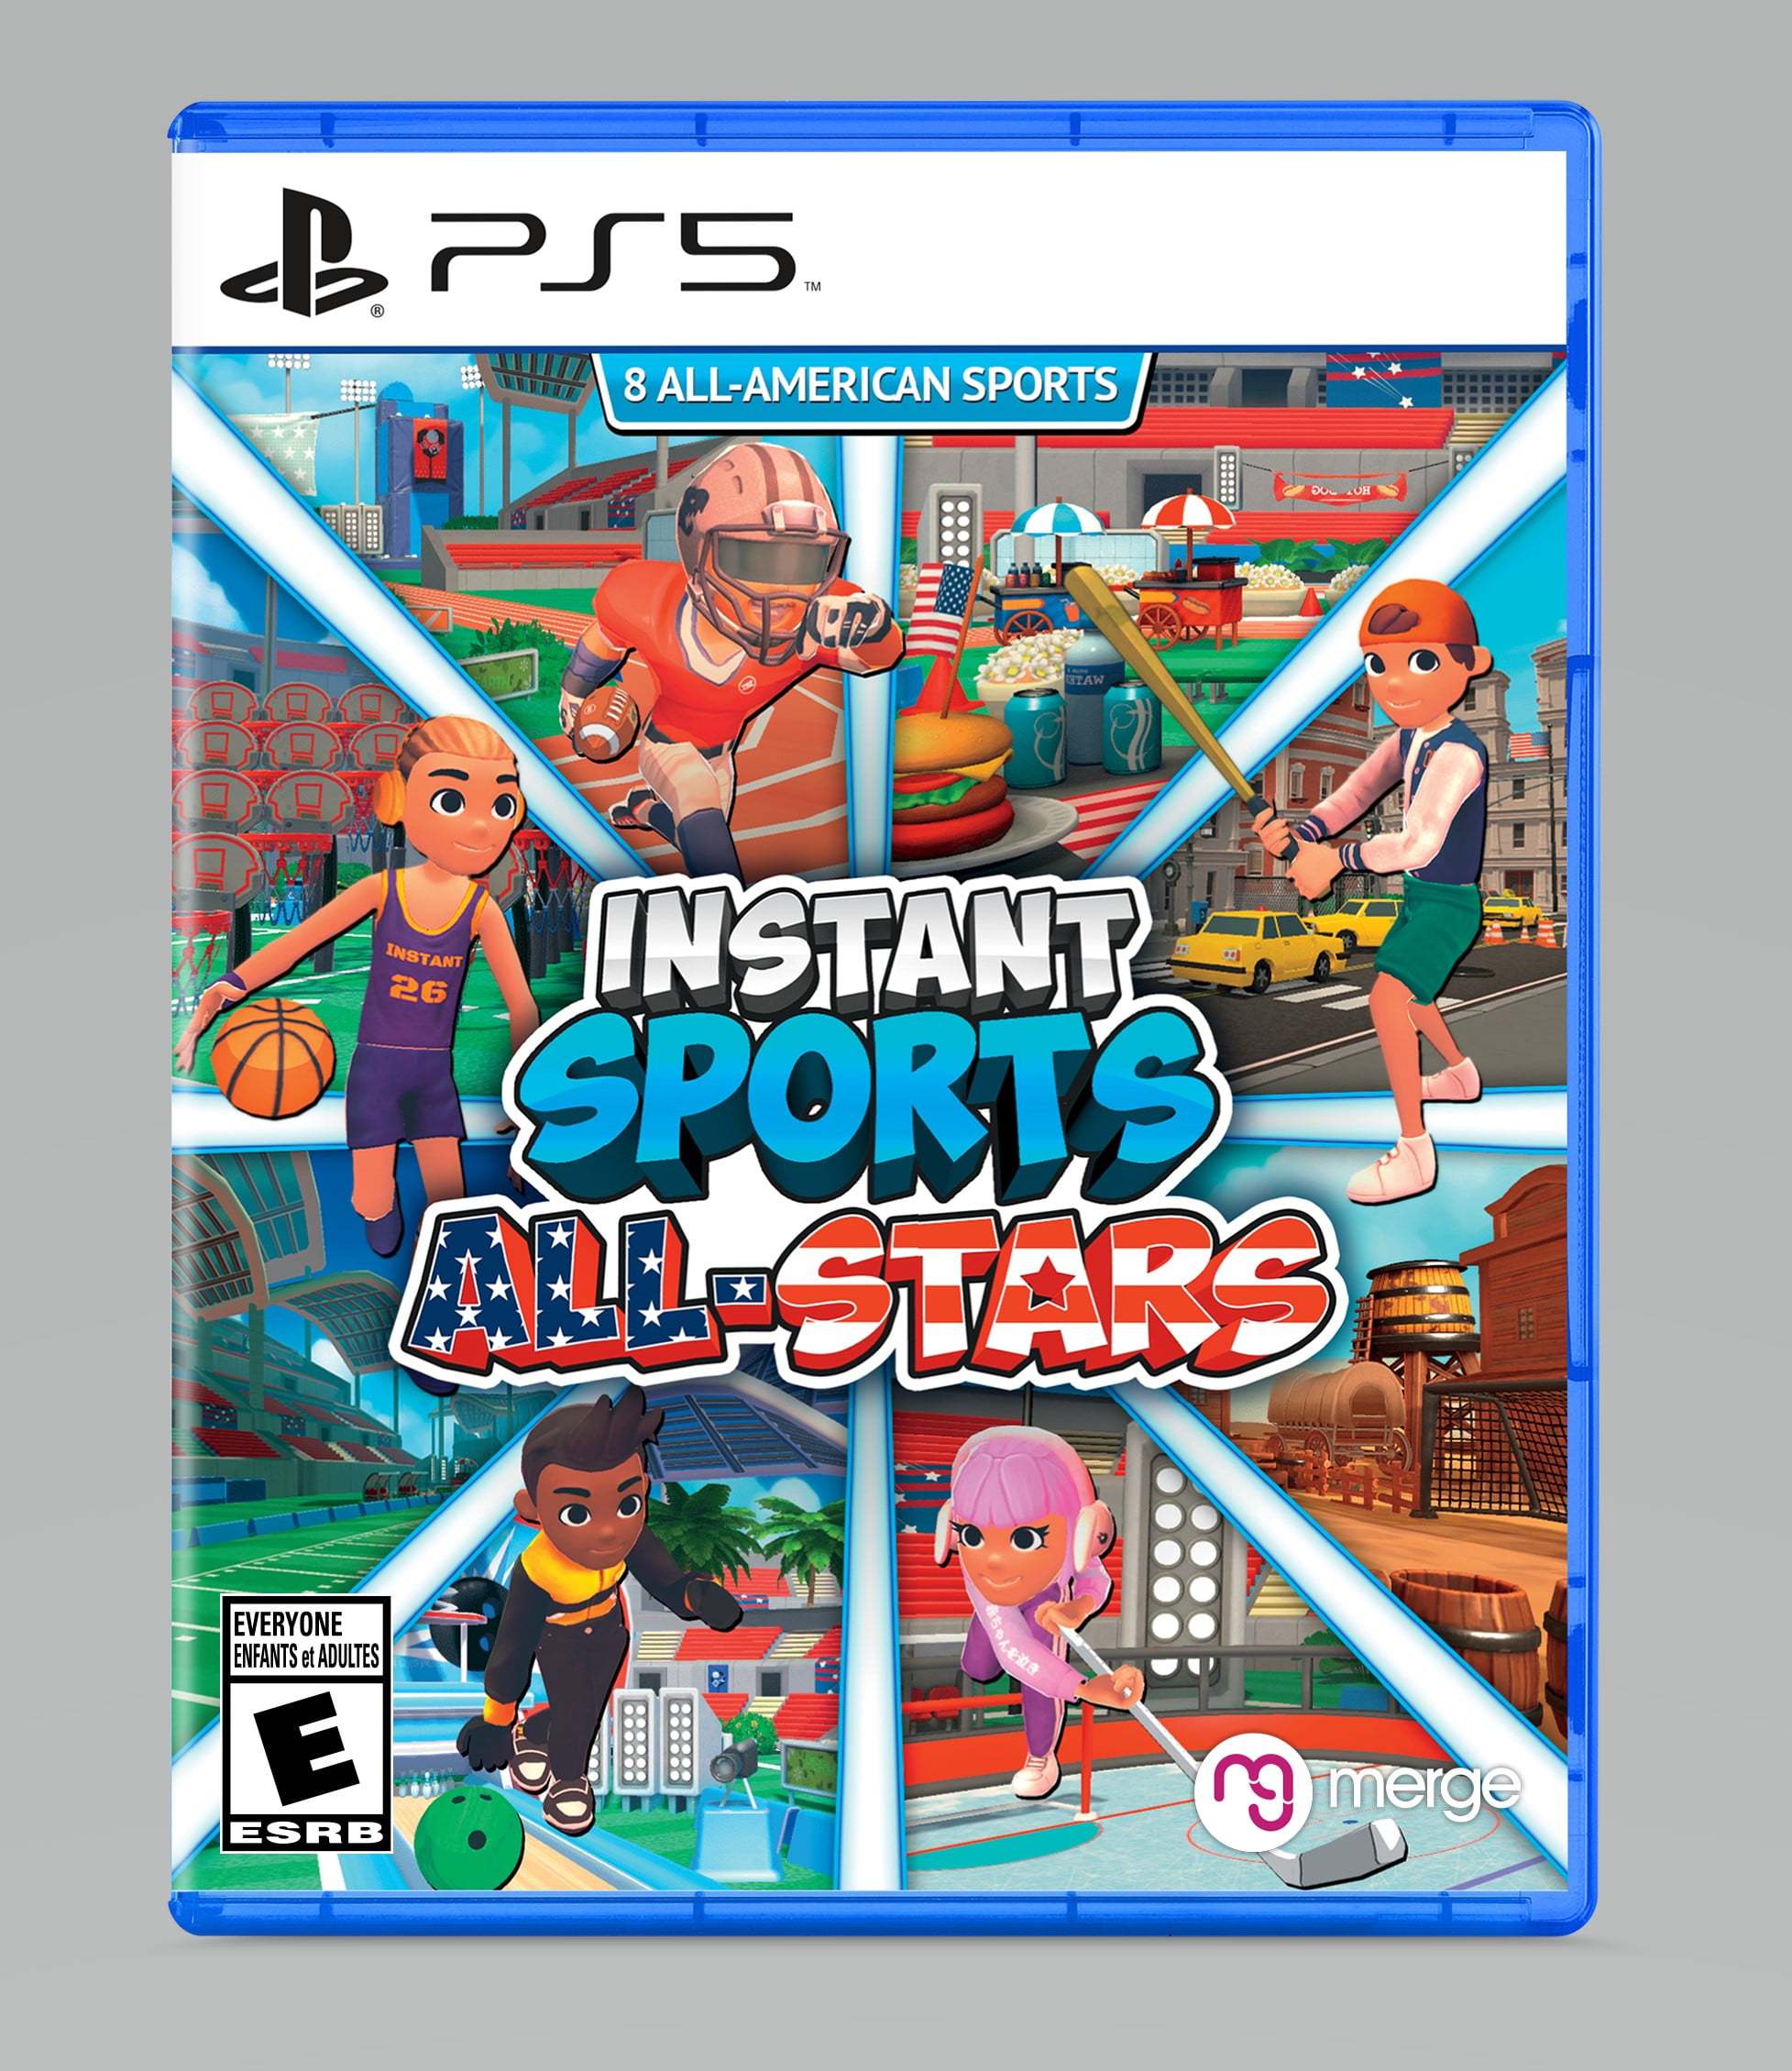 All Sports 819335021310 Instant Stars, PlayStation Games, Merge 5,